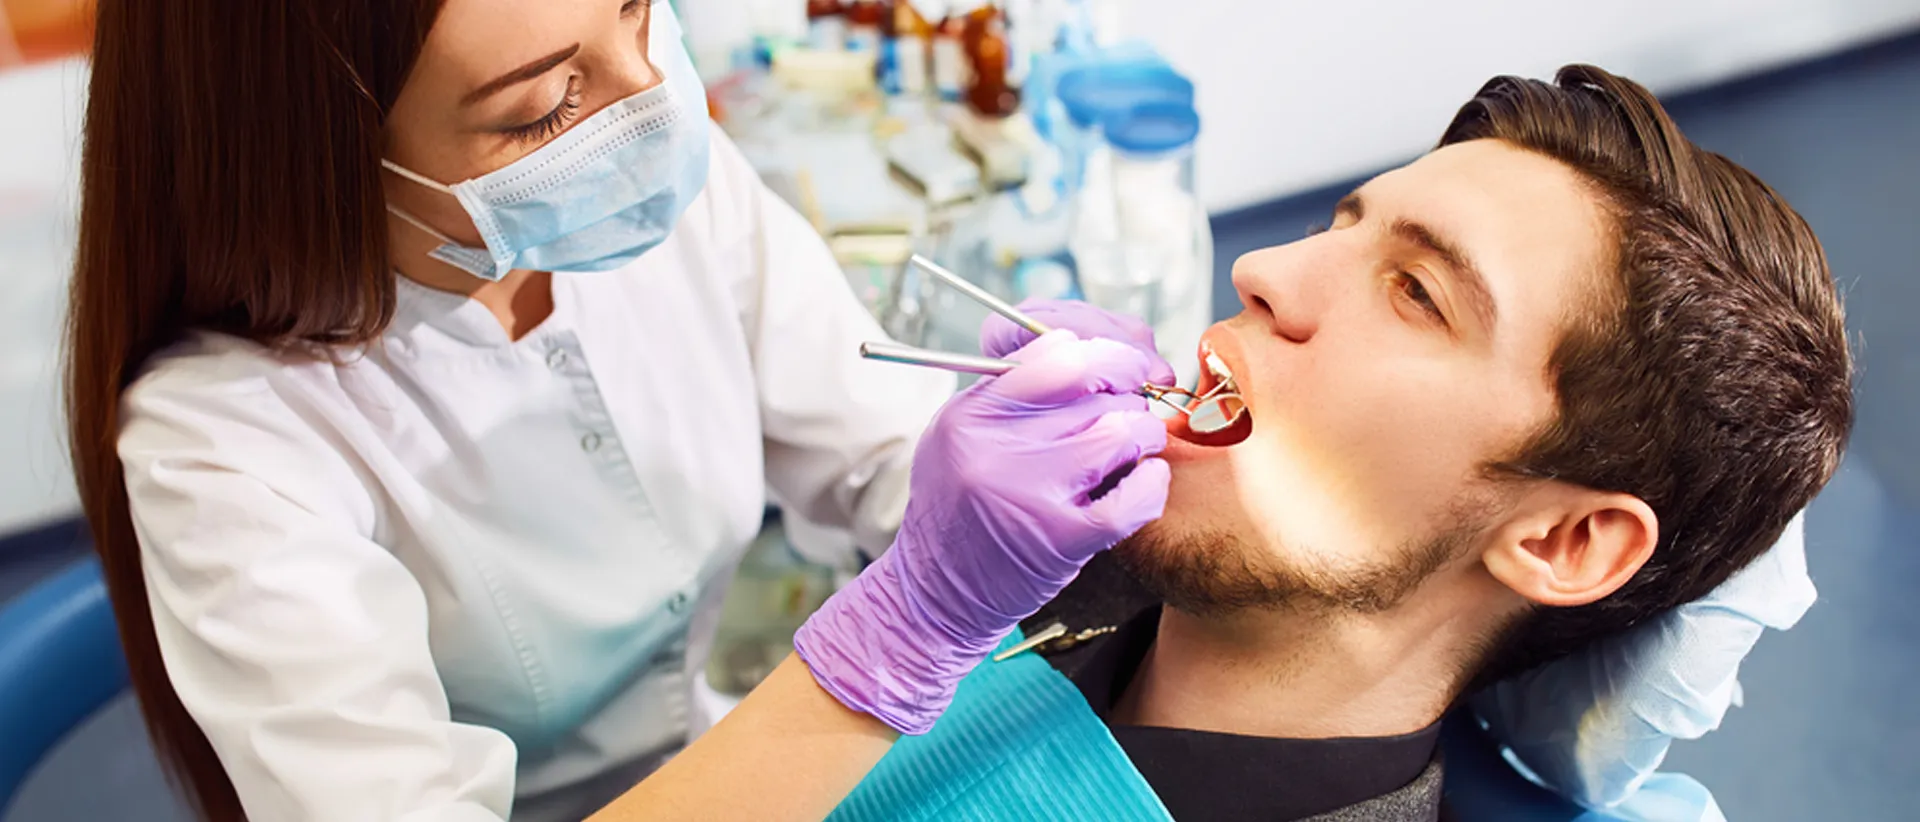 Dentist and patient - painless root canal treatment.
